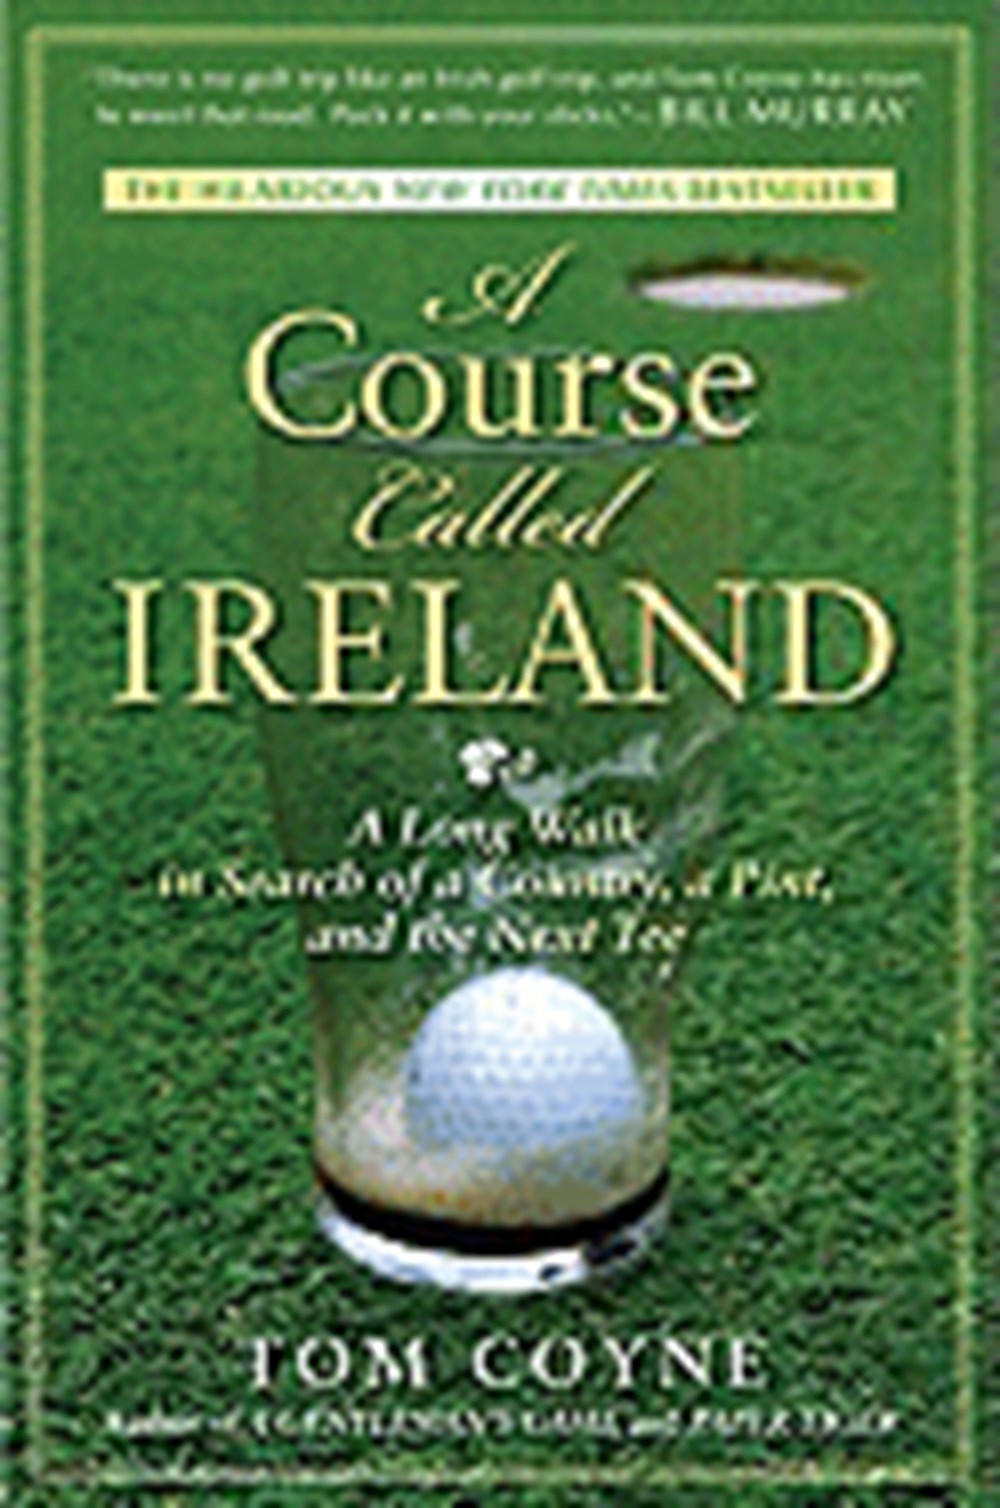 Course Called Ireland: A Long Walk in Search of a Country, a Pint, and the Next Tee